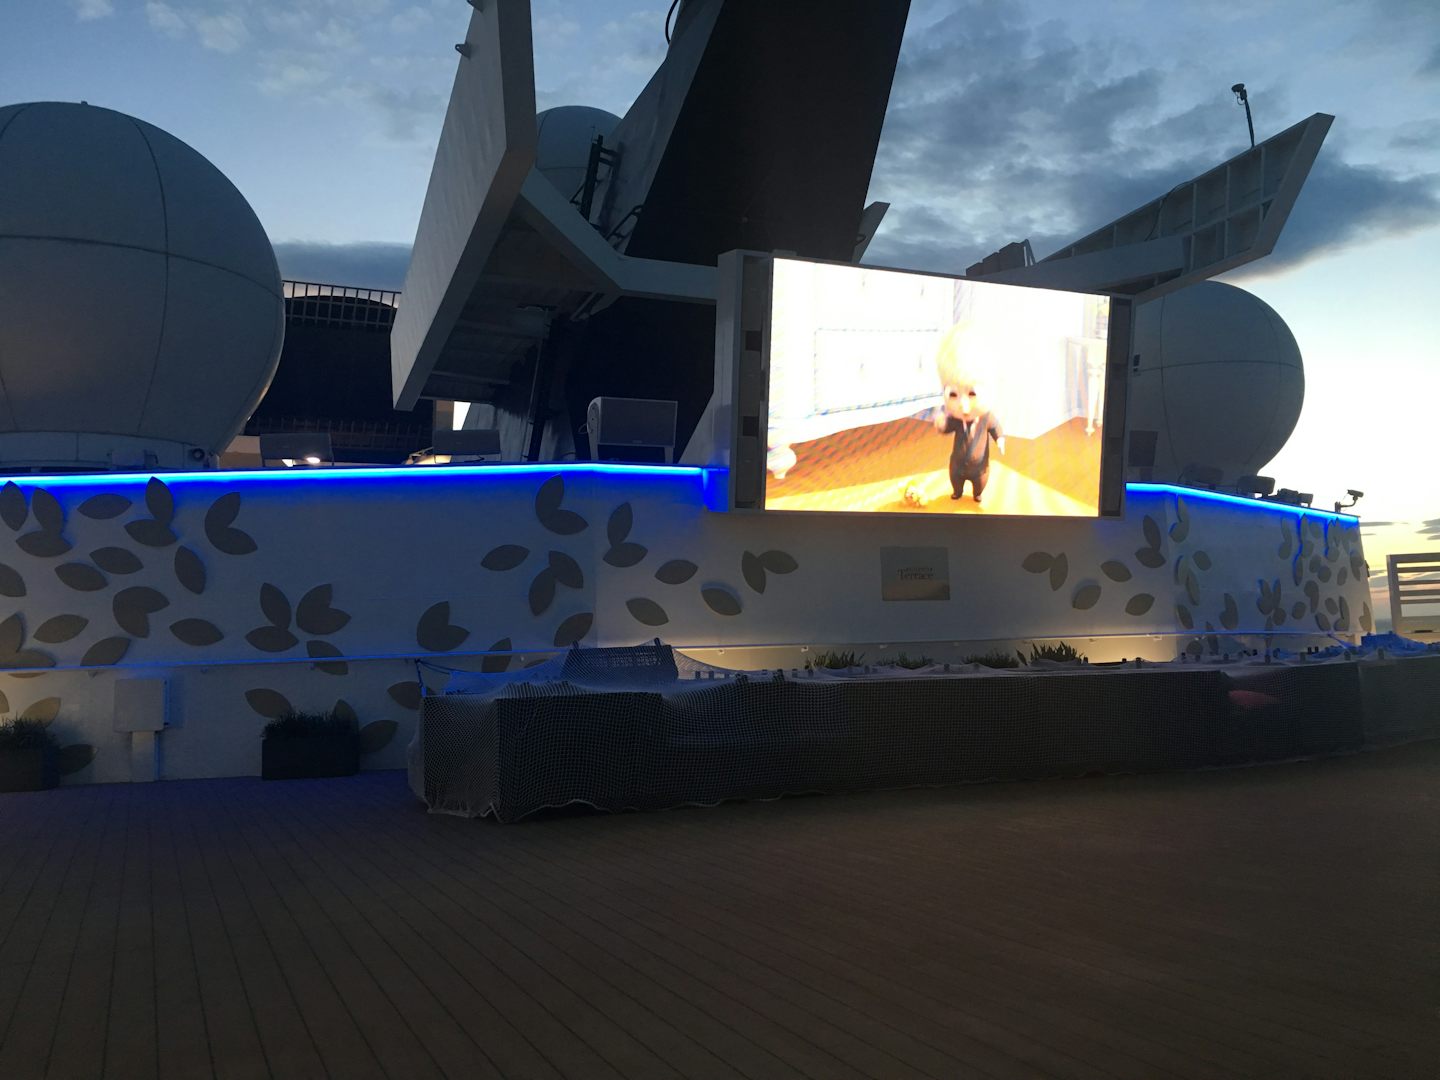 This is the outdoor movie theatre